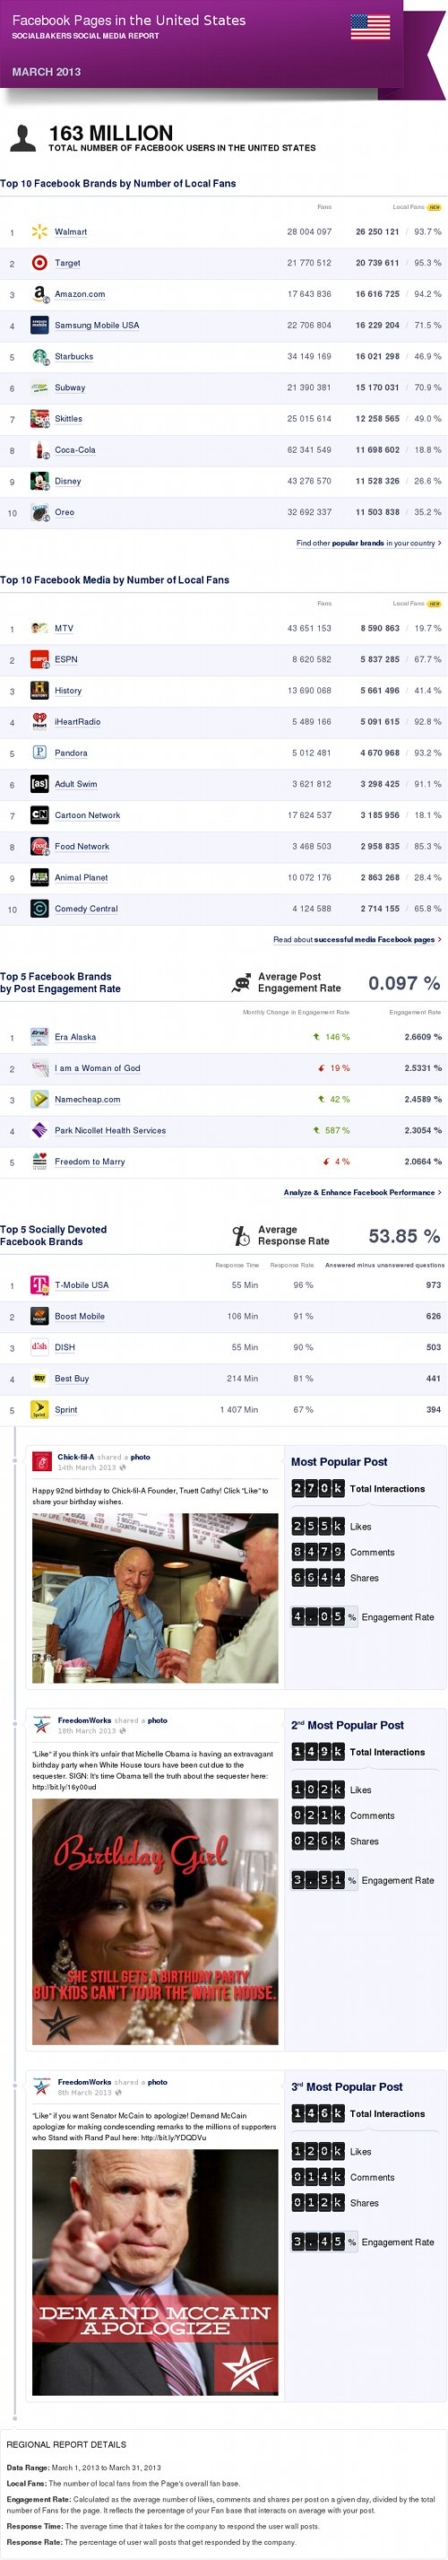 Top Facebook Pages in the US, March ’13